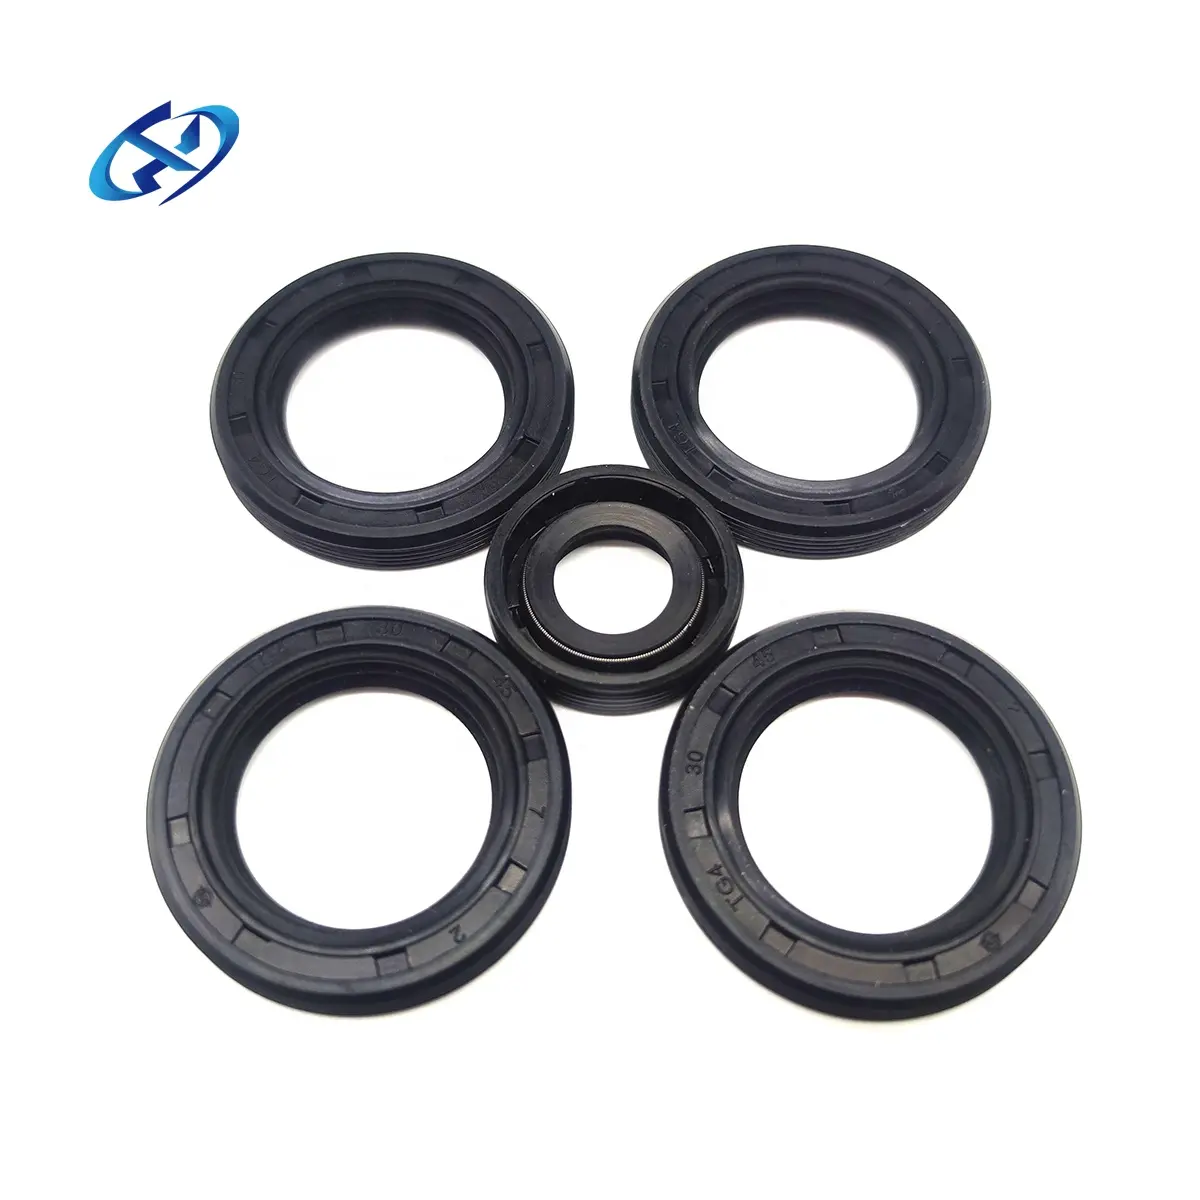 Gear Pumps High Quality Black Tg Nitrile Rubber Double Spring Oil Seals